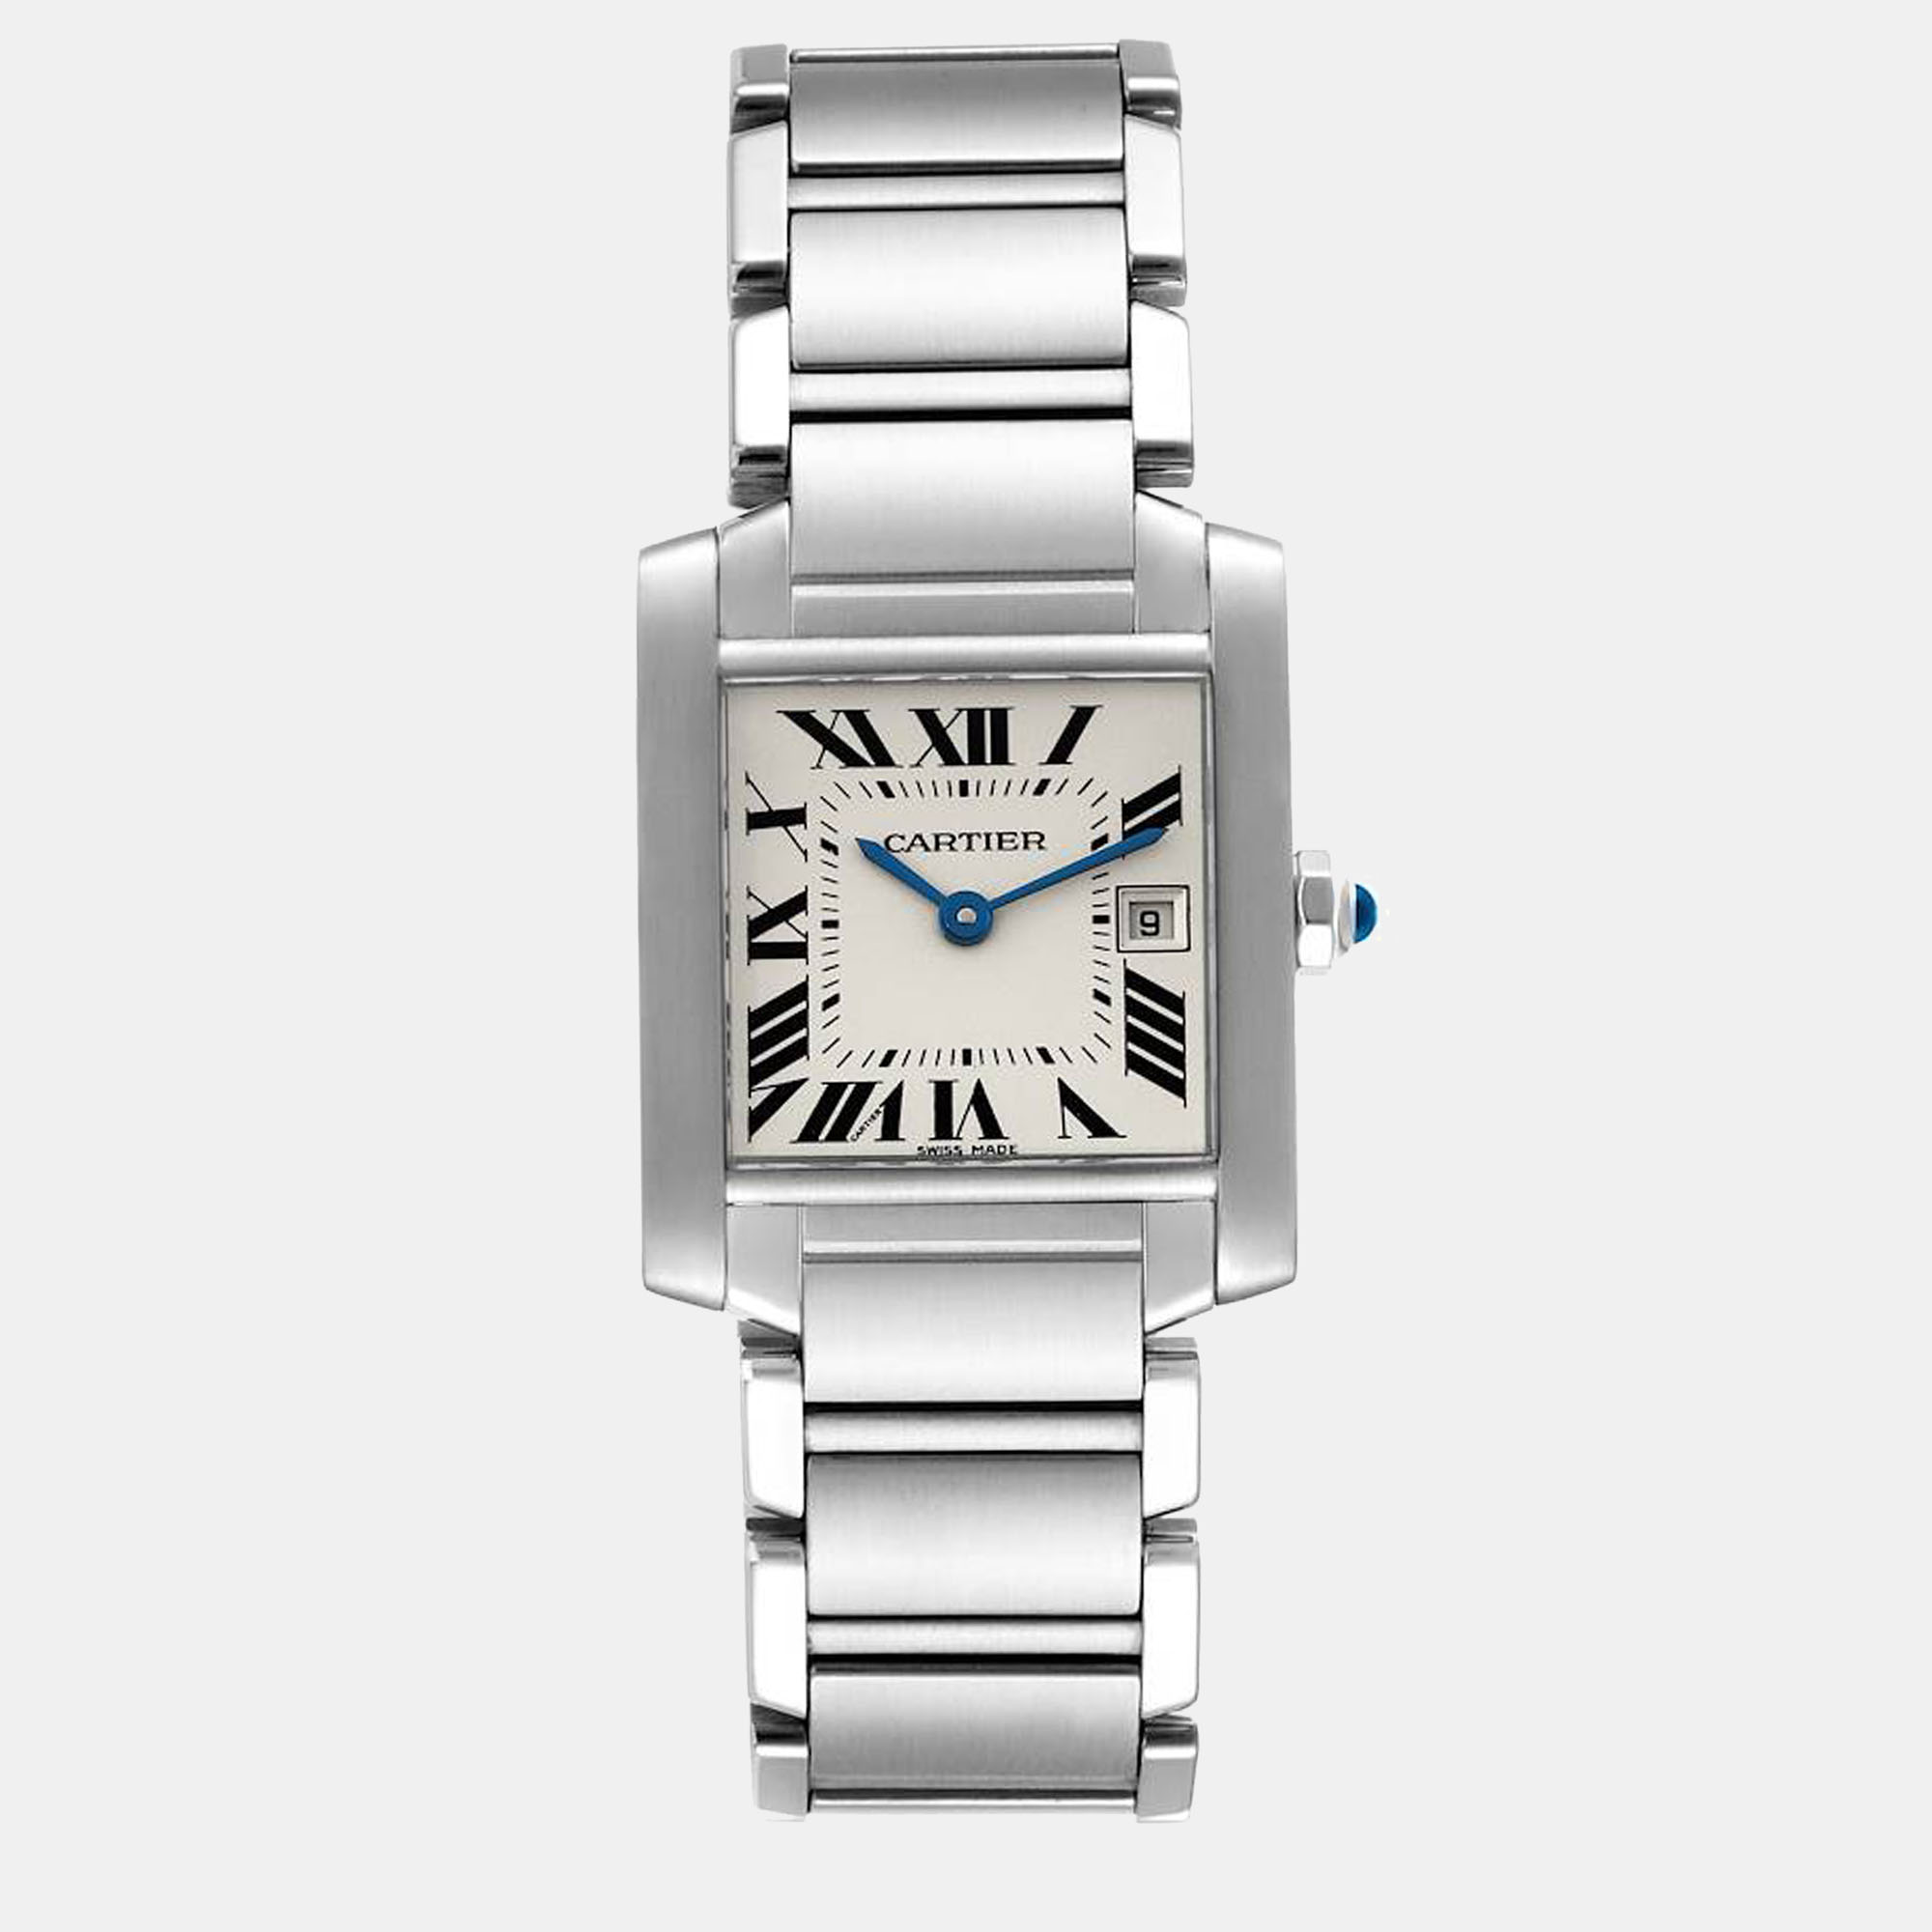 Cartier tank francaise midsize silver dial steel ladies watch w51011q3 25.0 x 30.0 mm